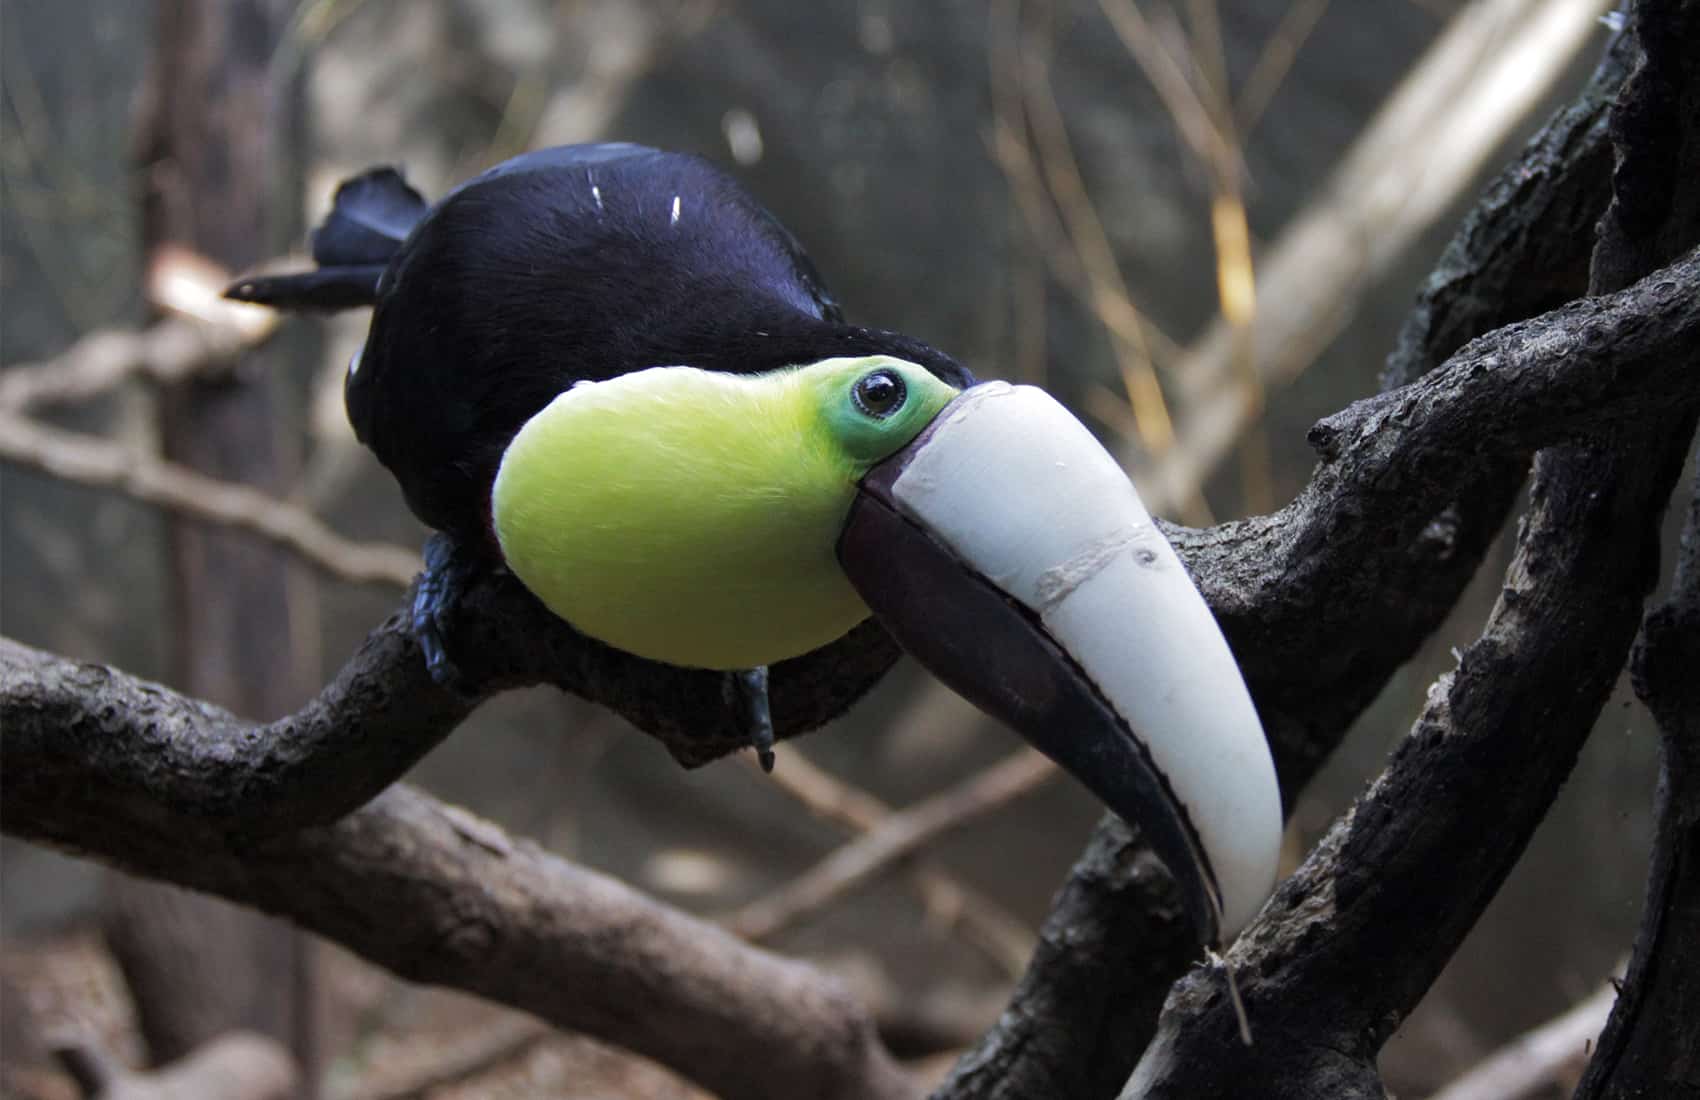 Grecia the toucan, ZooAve